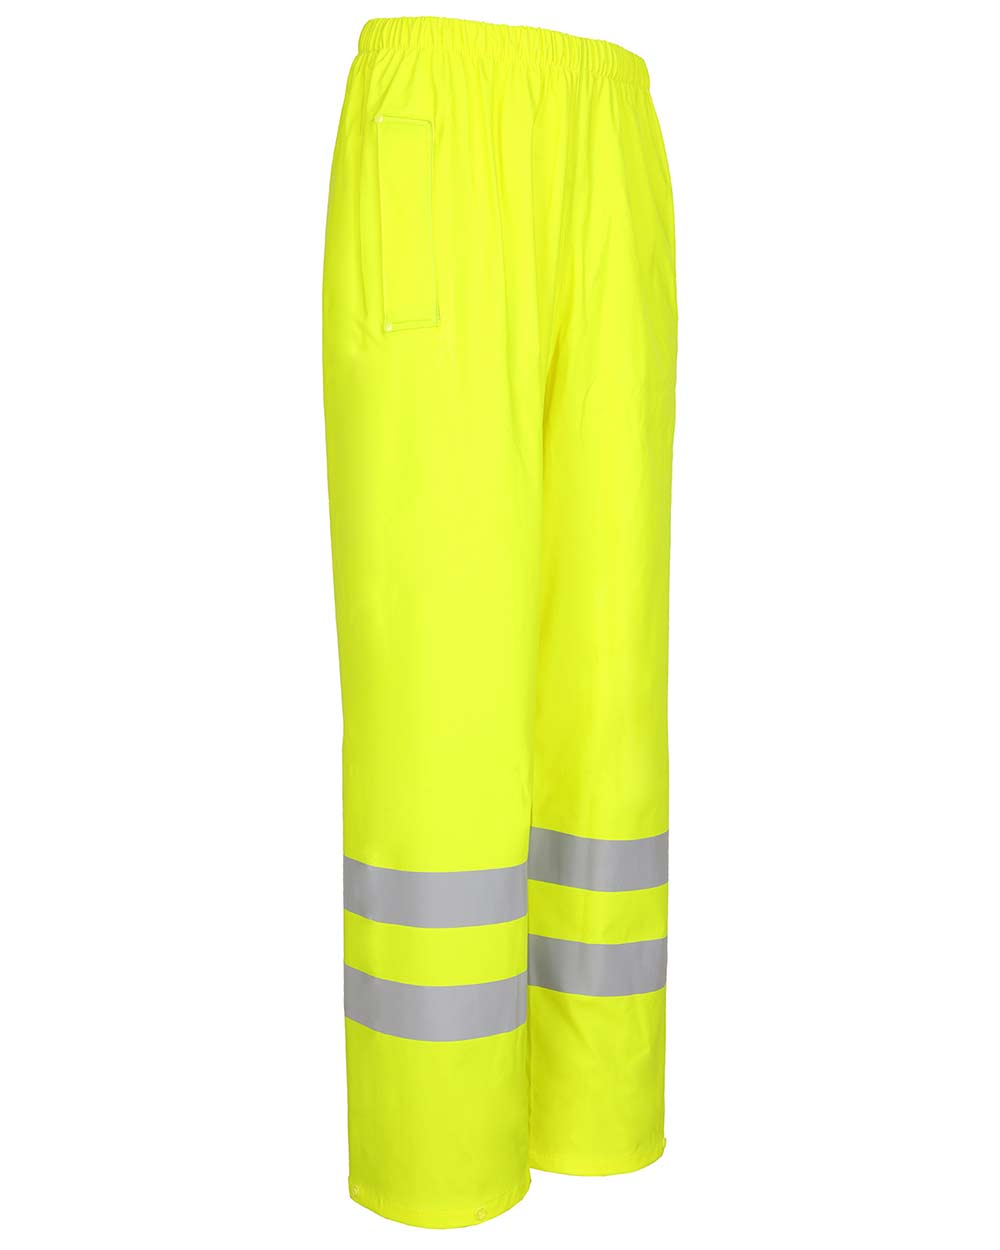 Right side view Fort Mens Air Reflex Hi-Vis Trousers in yellow with Reflective strips